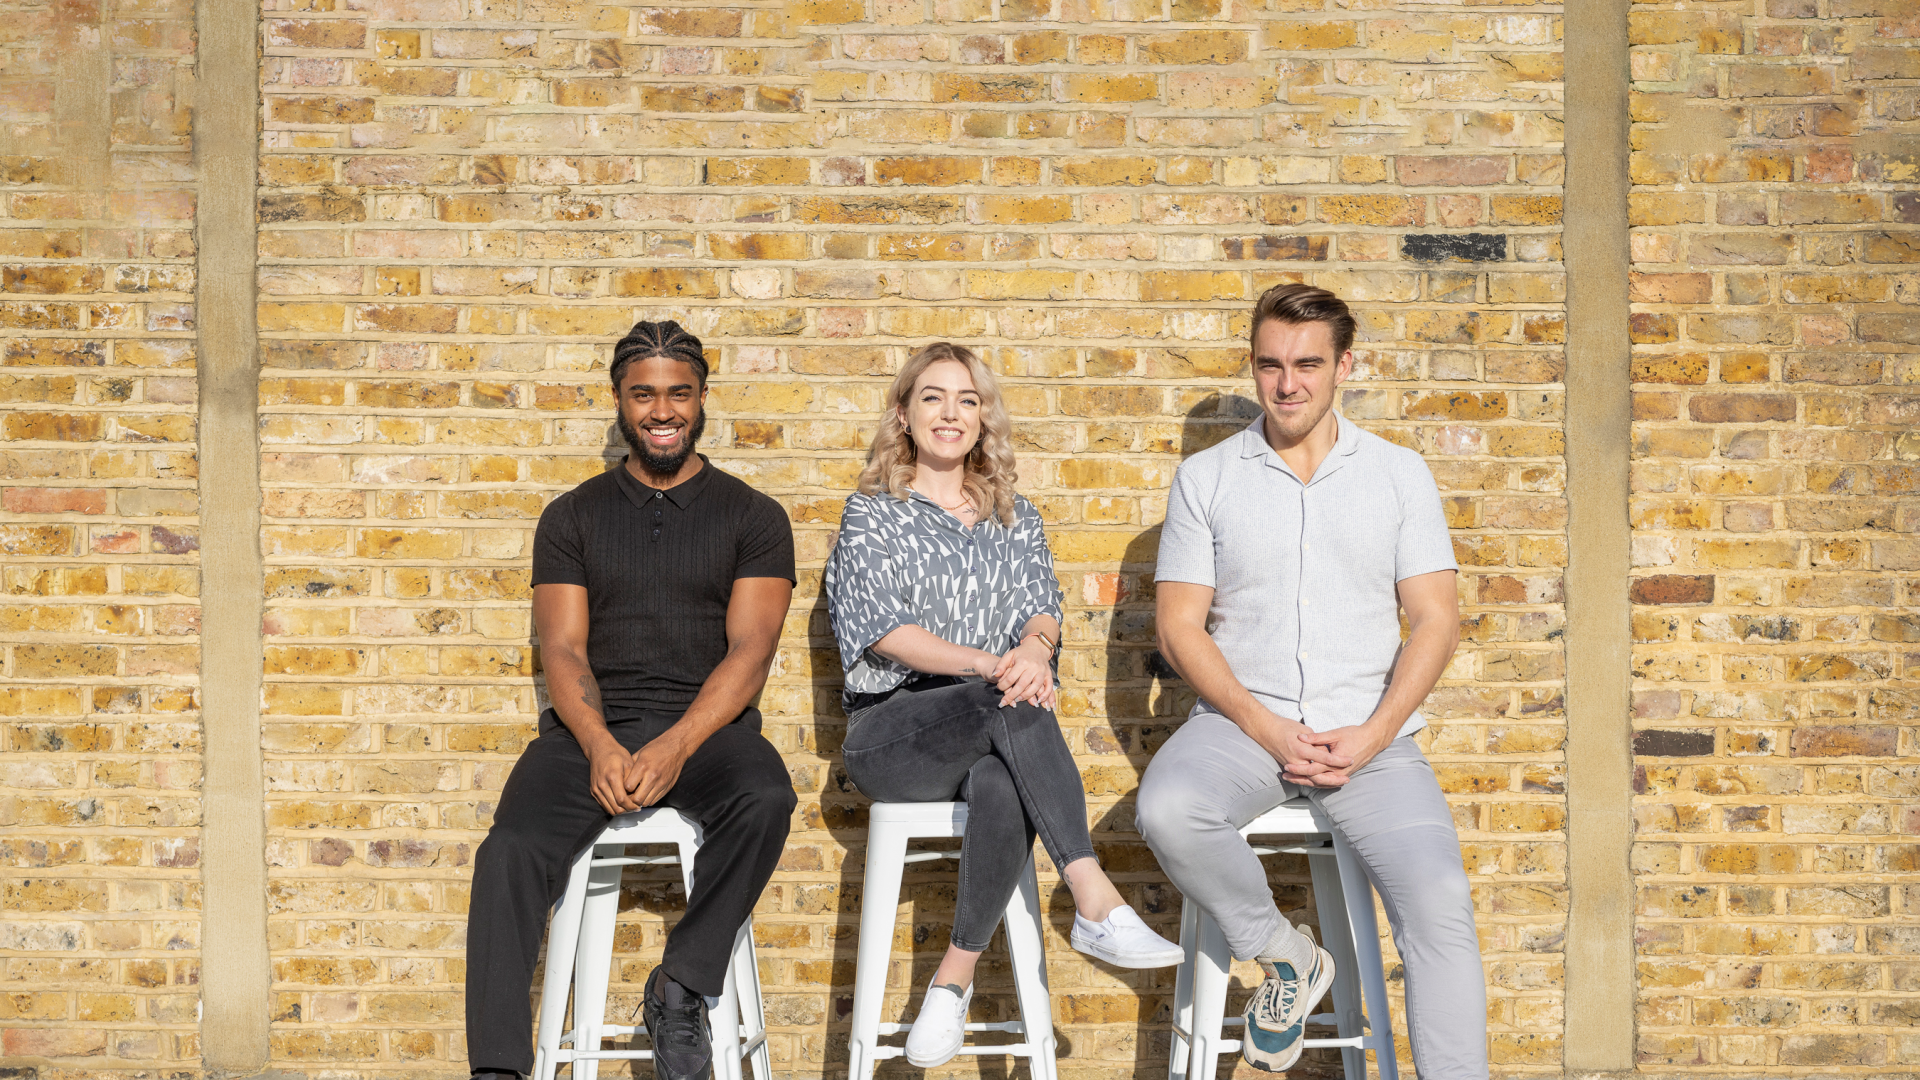 Marketing team sitting on stools against a brick wall and smiling